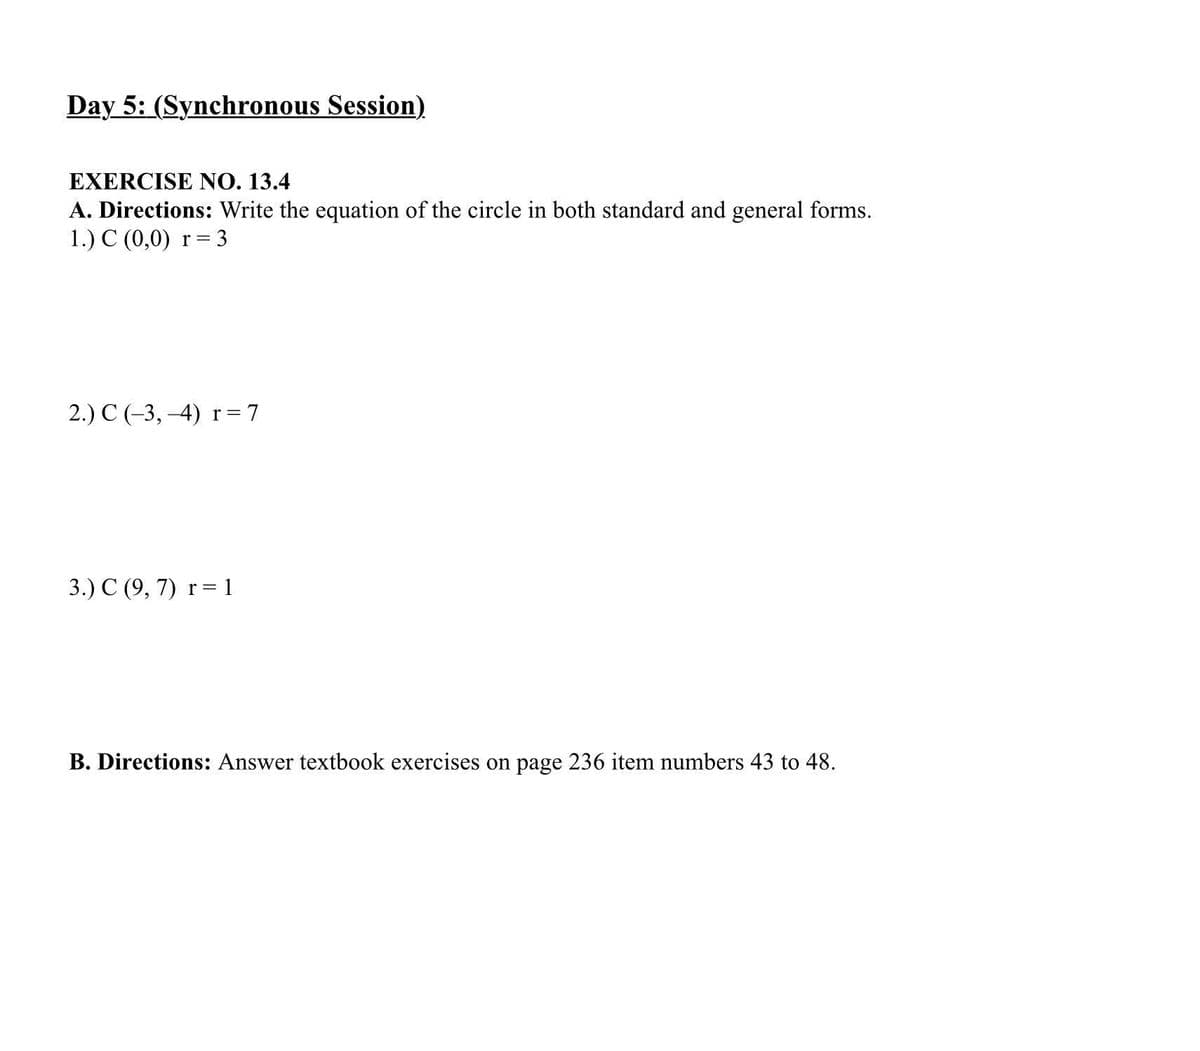 Day 5: (Synchronous Session)
EXERCISE NO. 13.4
A. Directions: Write the equation of the circle in both standard and general forms.
1.) C (0,0)
r =
2.) C (-3, -4) r= 7
3.) C (9, 7) r= 1
||
B. Directions: Answer textbook exercises on page 236 item numbers 43 to 48.
